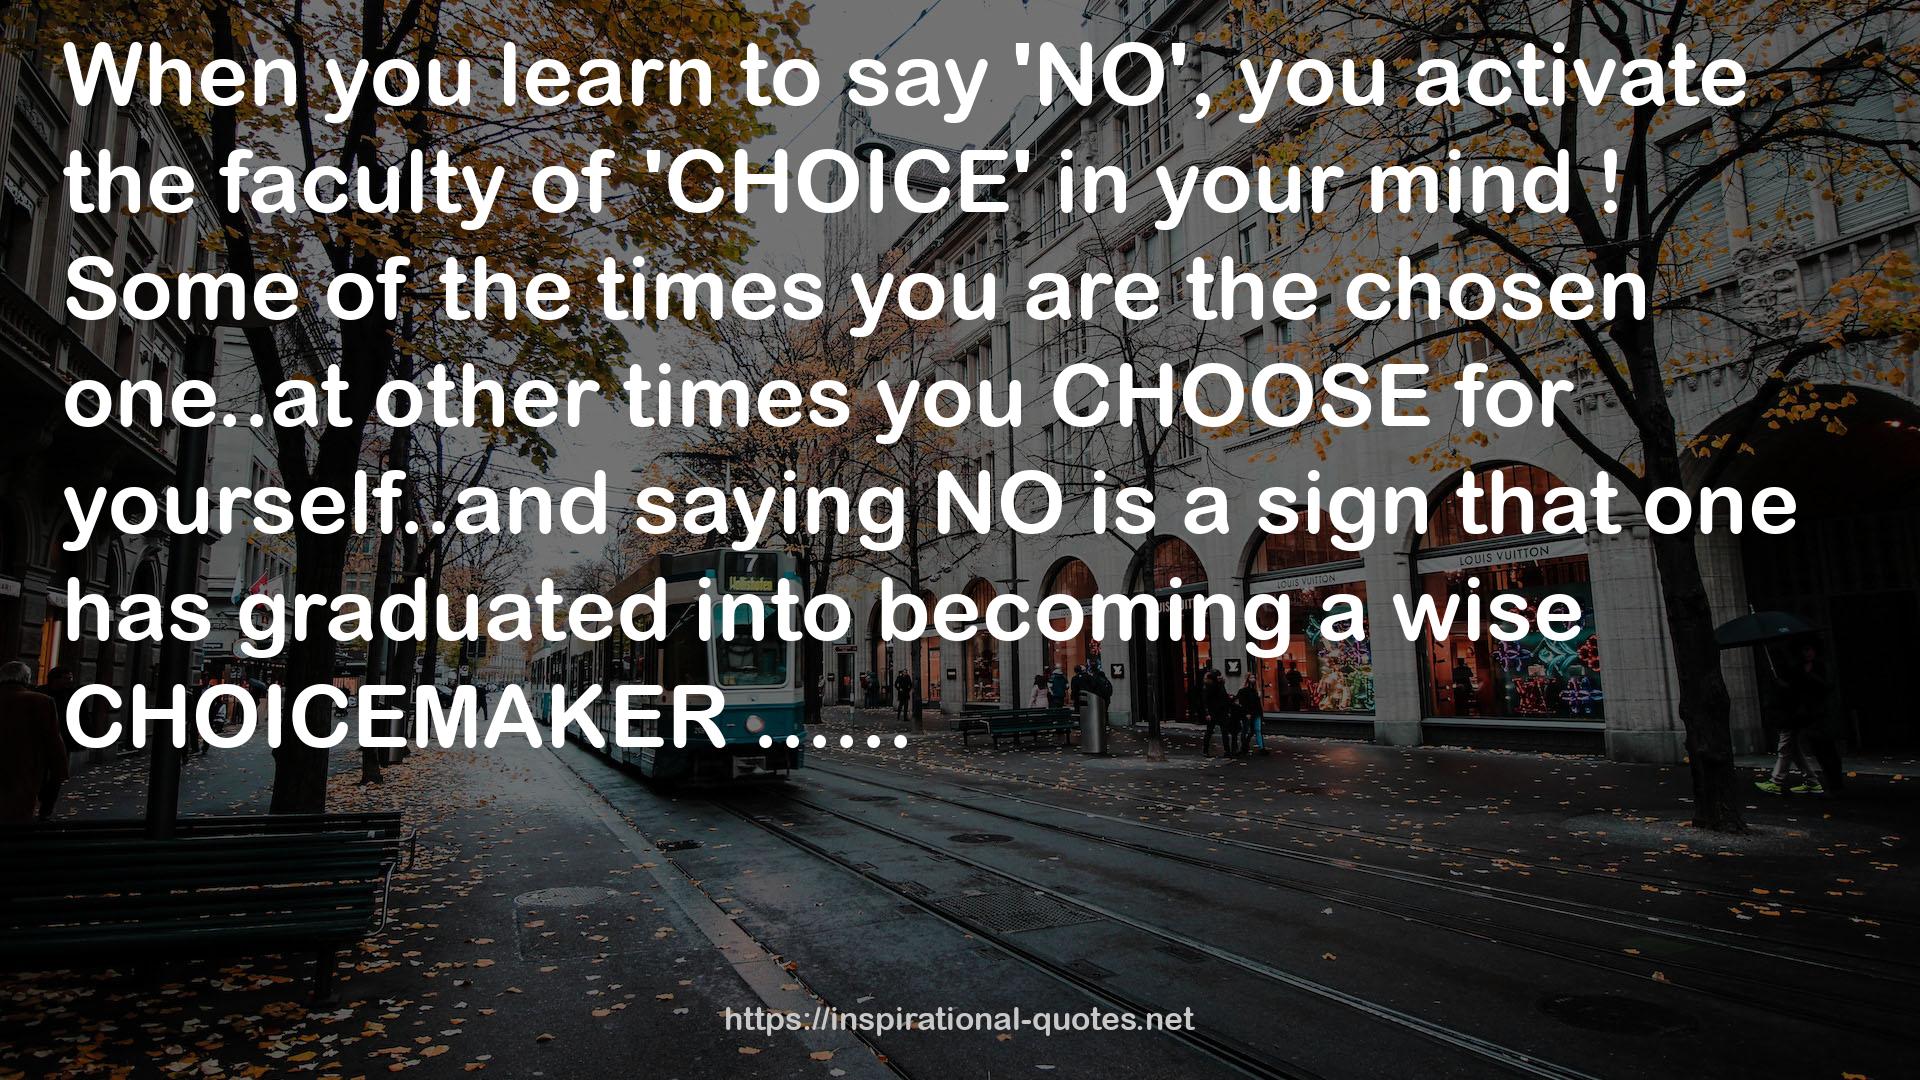 a wise CHOICEMAKER  QUOTES